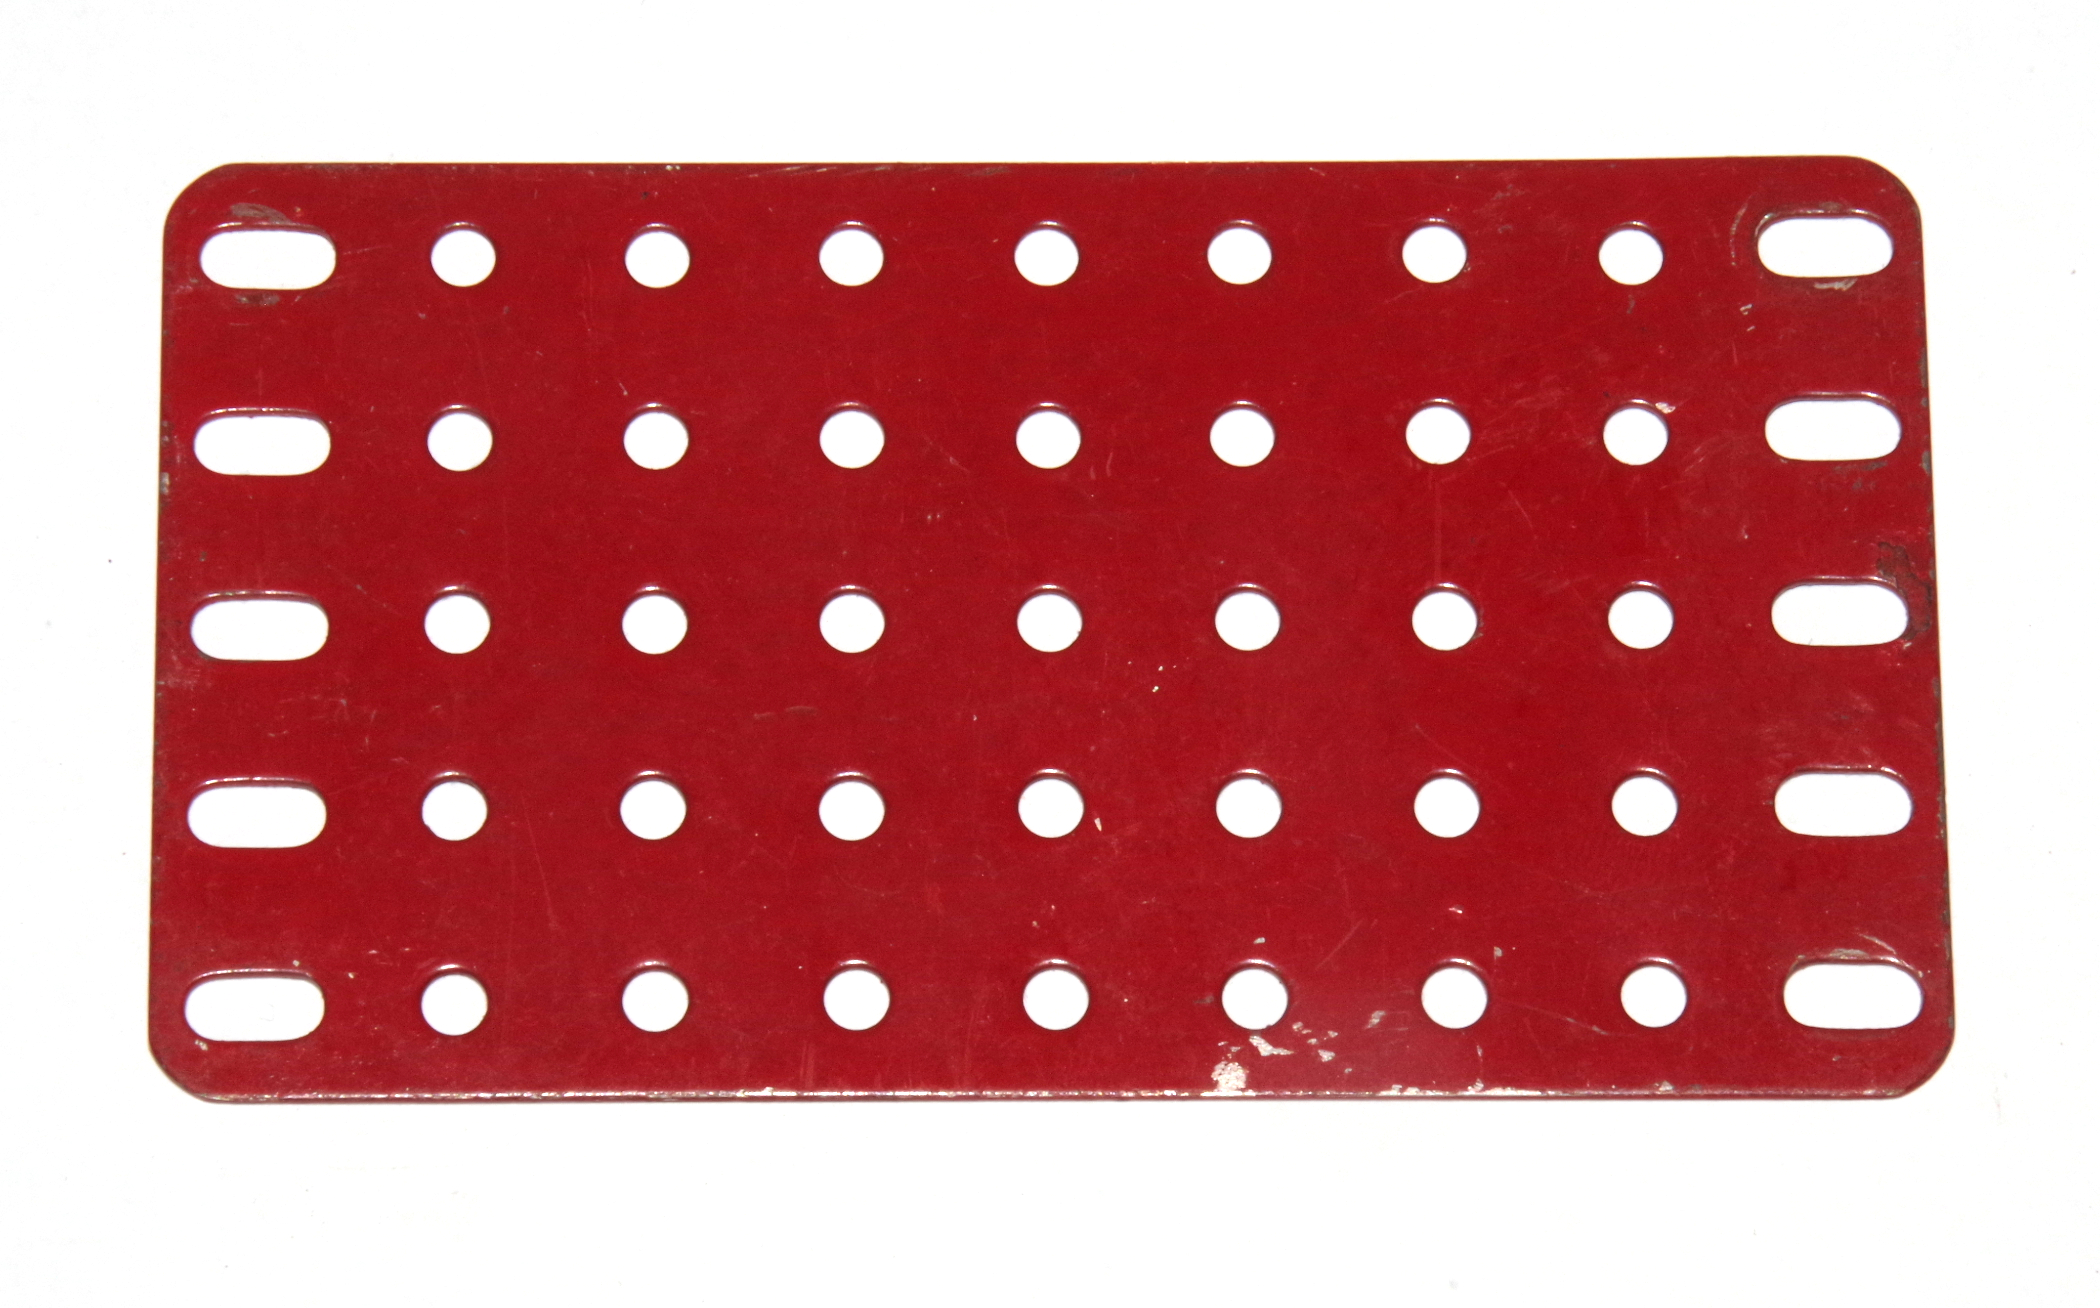 53a Flat Plate 9x5 Hole Mid Red Used